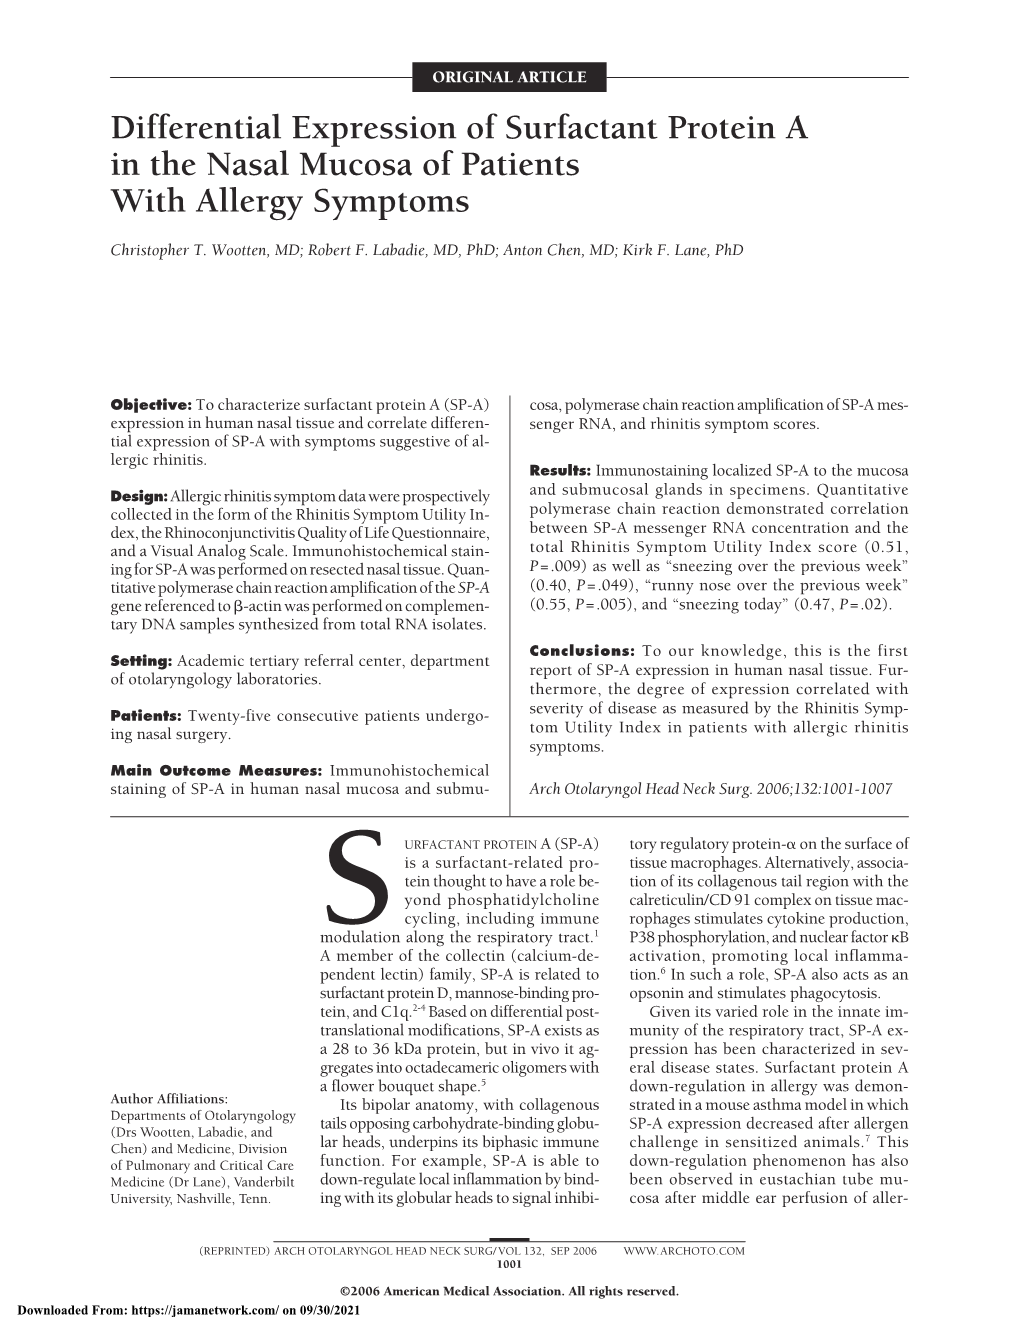 Differential Expression of Surfactant Protein a in the Nasal Mucosa of Patients with Allergy Symptoms